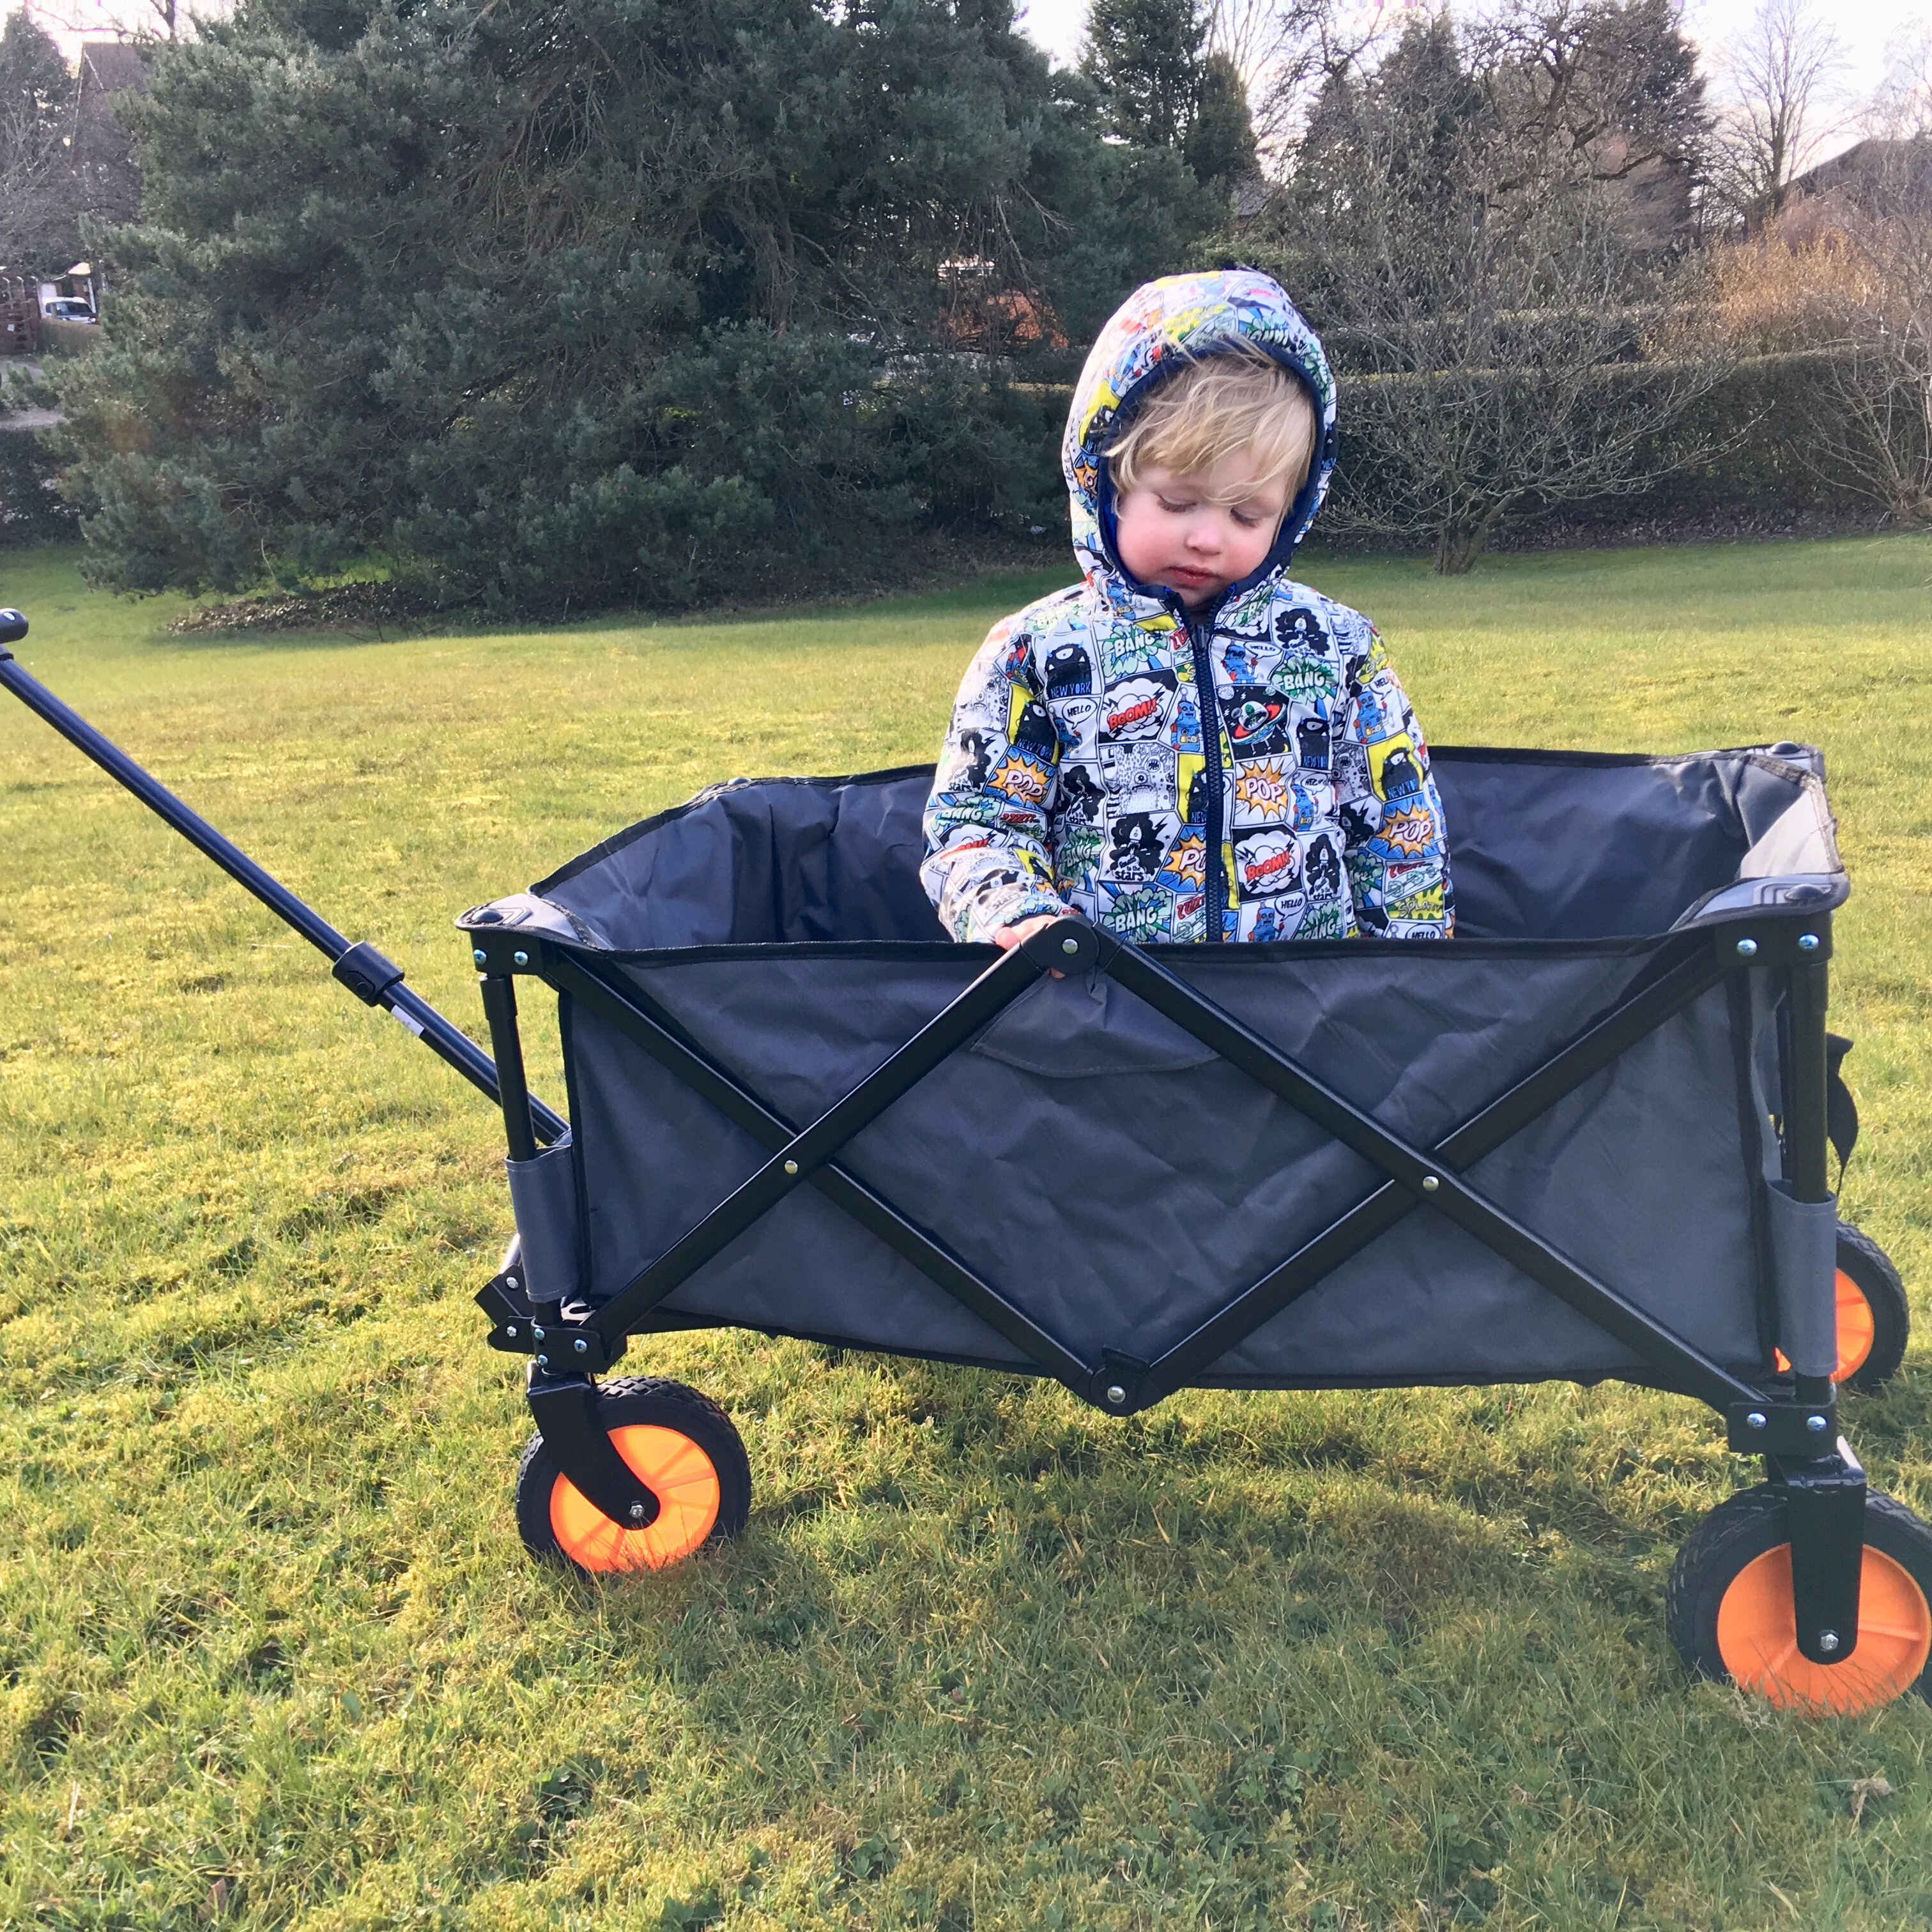 VonHaus camping folding cart review. You can see the full side of the cart, it is grey with black steel frame and orange wheels/ Lucas is sat in the cart and you can see a field and tree in the background